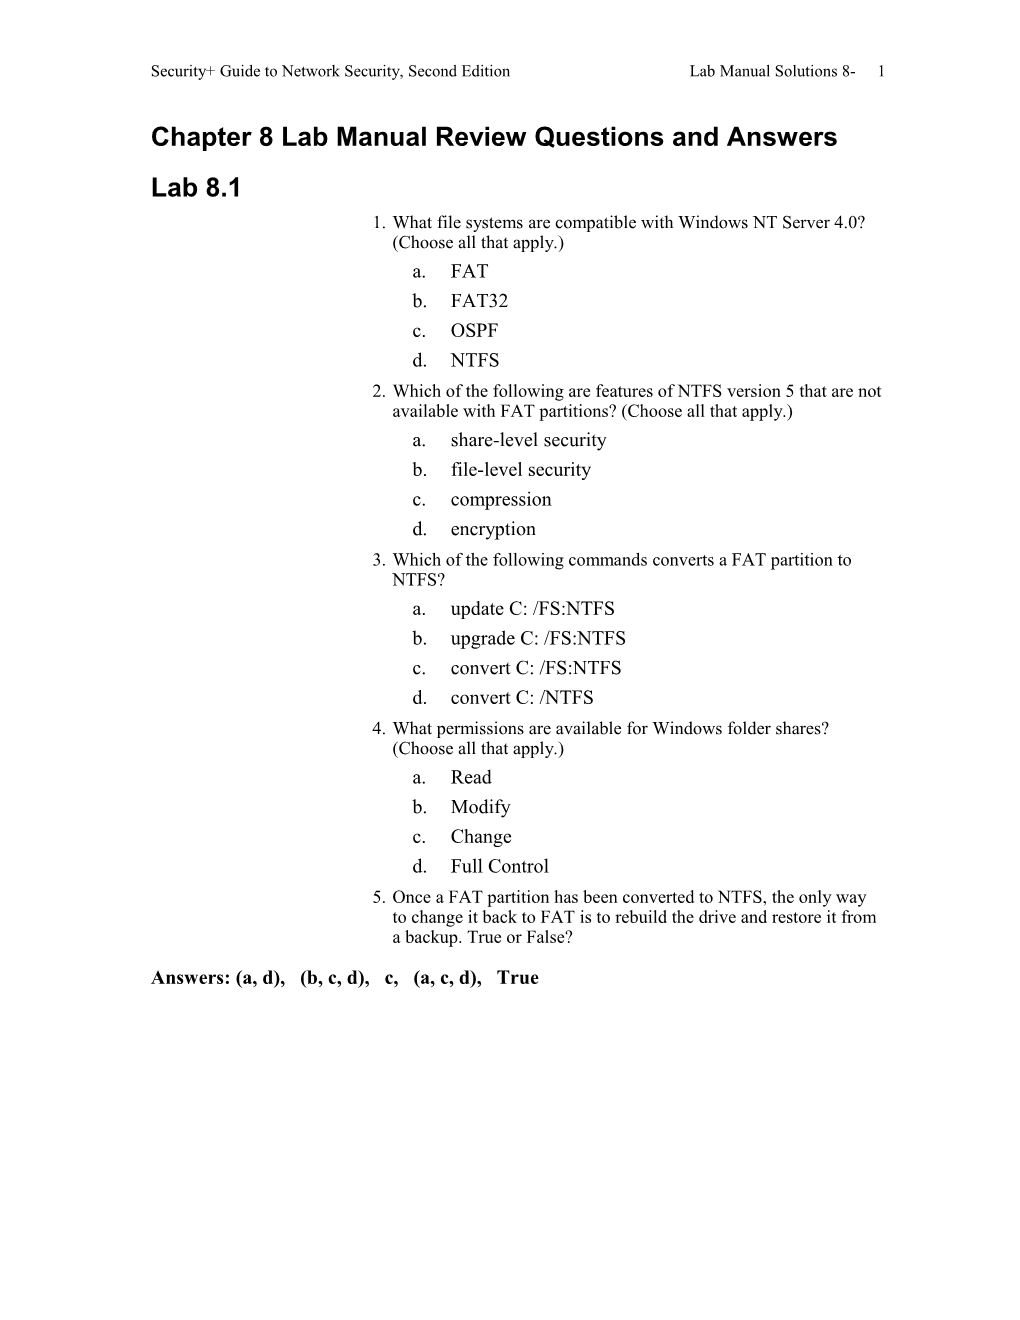 Chapter 8 Lab Manual Review Questions and Answers